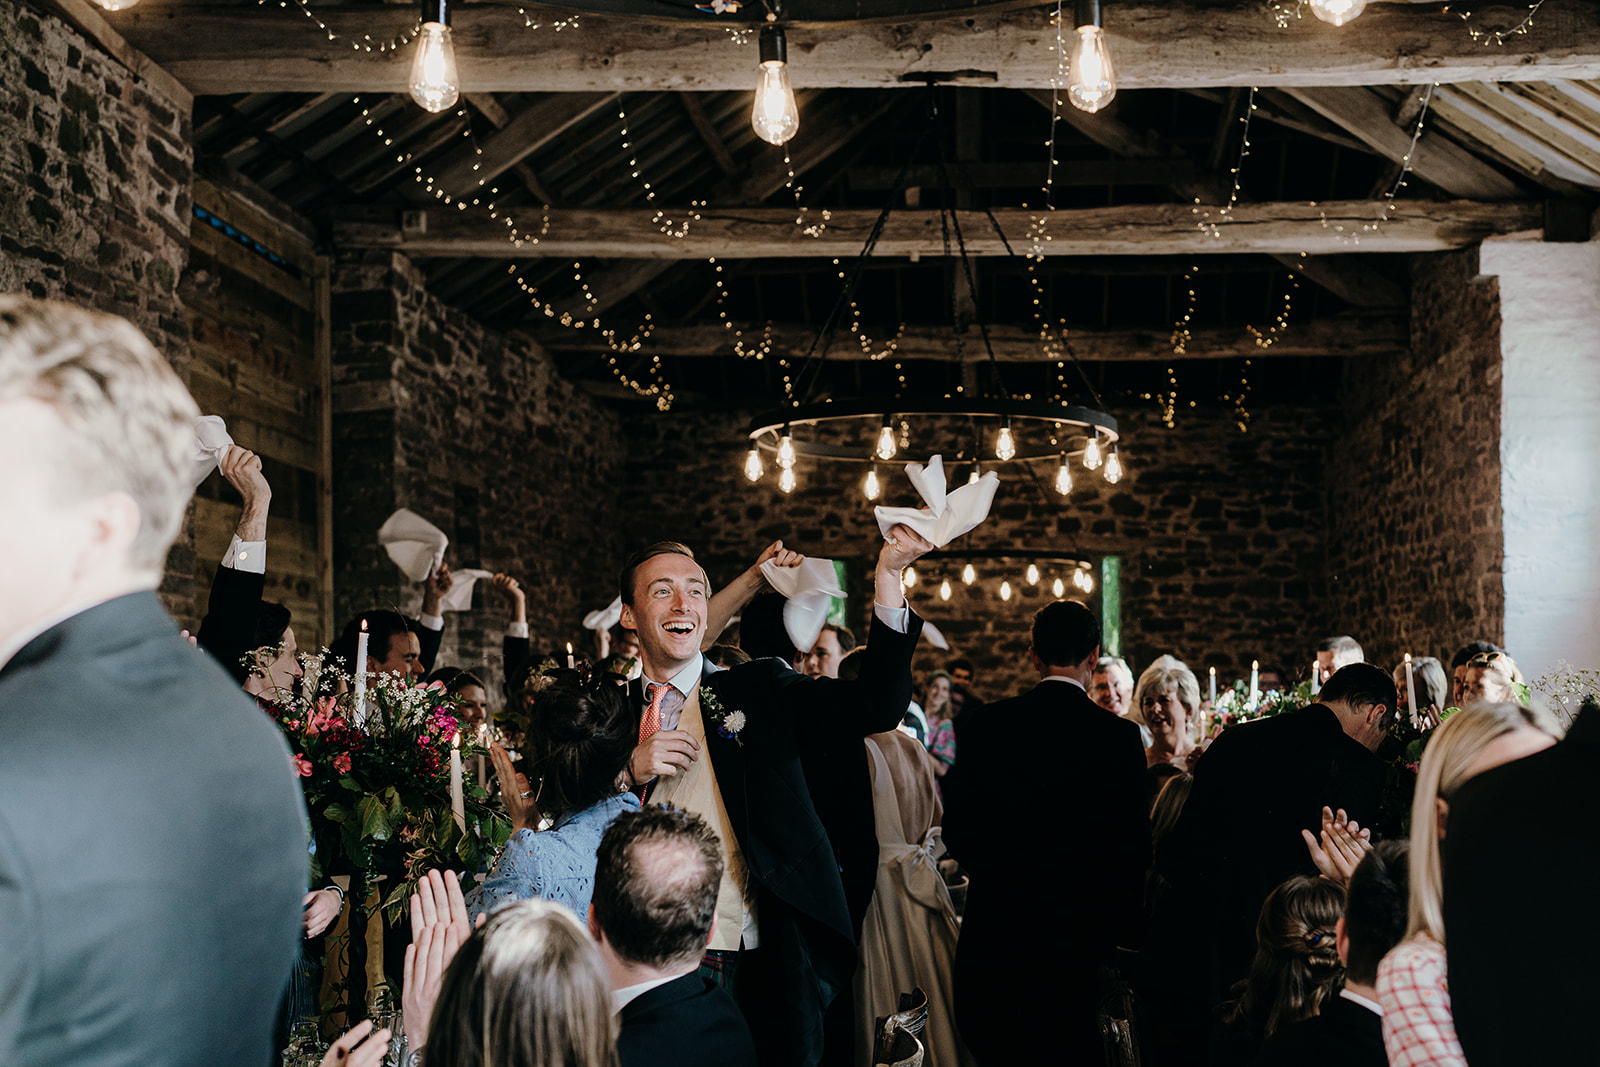 Guests cheering and welcoming in the bride and groom with napkins circling above their heads.